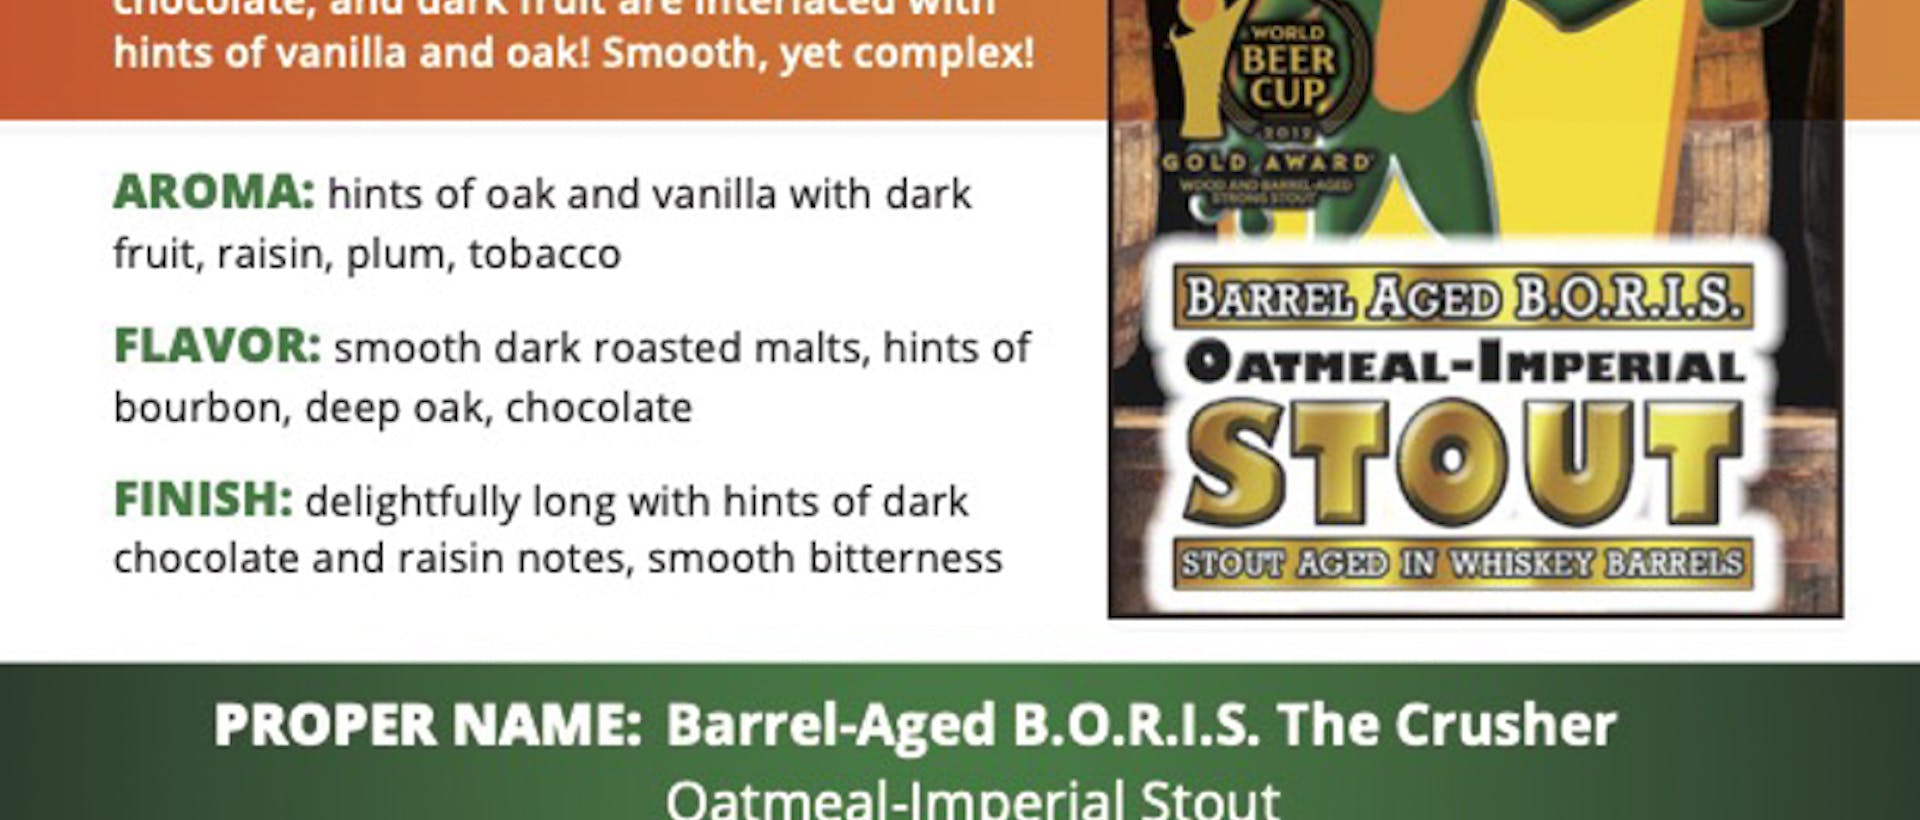 HF_Sell Sheet - Year Round - Barrel-Aged B.O.R.I.S. The Crusher Oatmeal Imperial Stout (updated 01-27-2022)